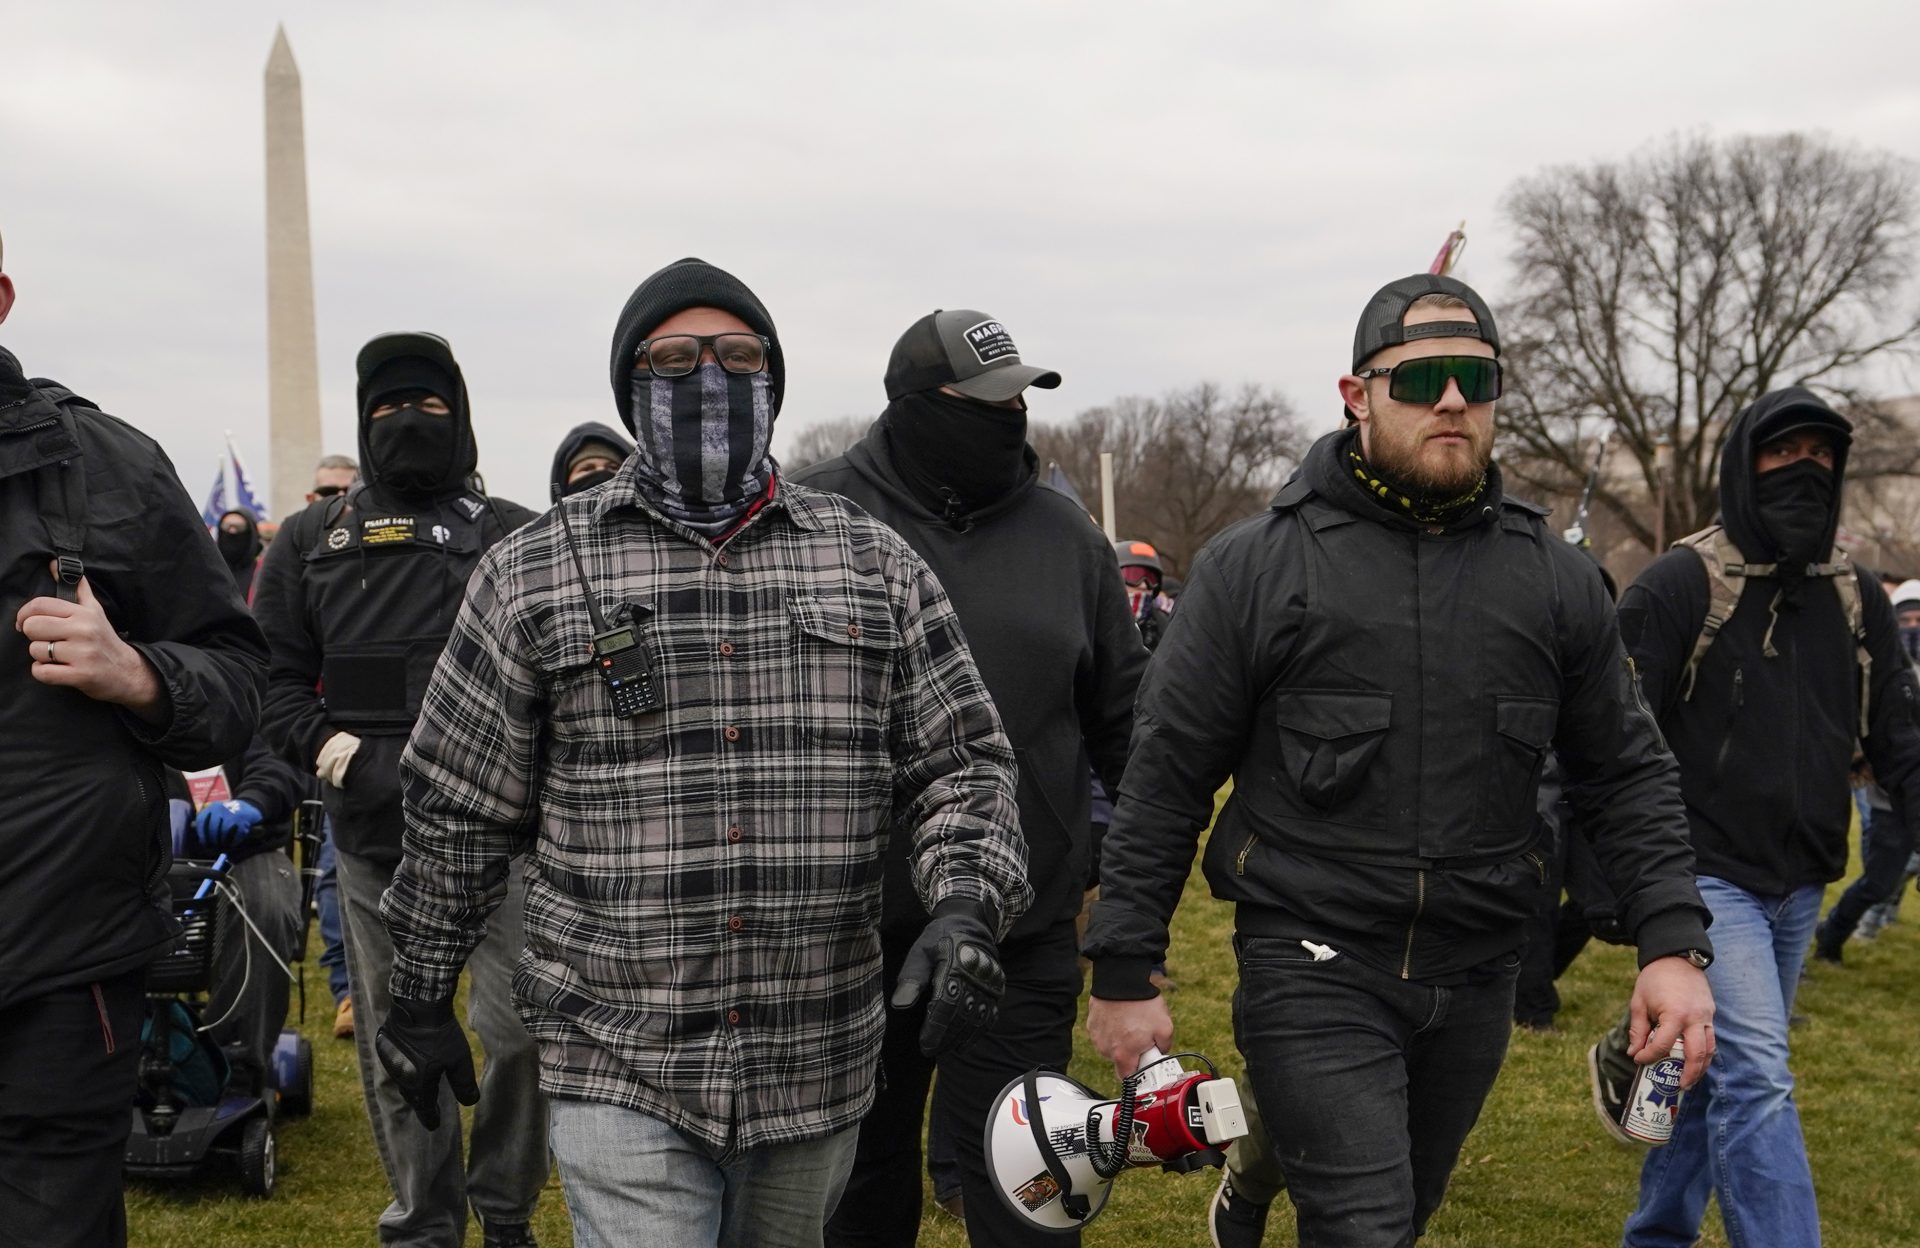 In this Jan. 6, 2021, photo, Proud Boy members Joseph Biggs, left, and Ethan Nordean, right with megaphone, walk toward the U.S. Capitol in Washington, in support of President Donald Trump. The Proud Boys and Oath Keepers make up a fraction of the more than 300 Trump supporters charged so far in the siege that led to Trump's second impeachment and resulted in the deaths of five people, including a police officer. But several of their leaders, members and associates have become the central targets of the Justice Department’s sprawling investigation.